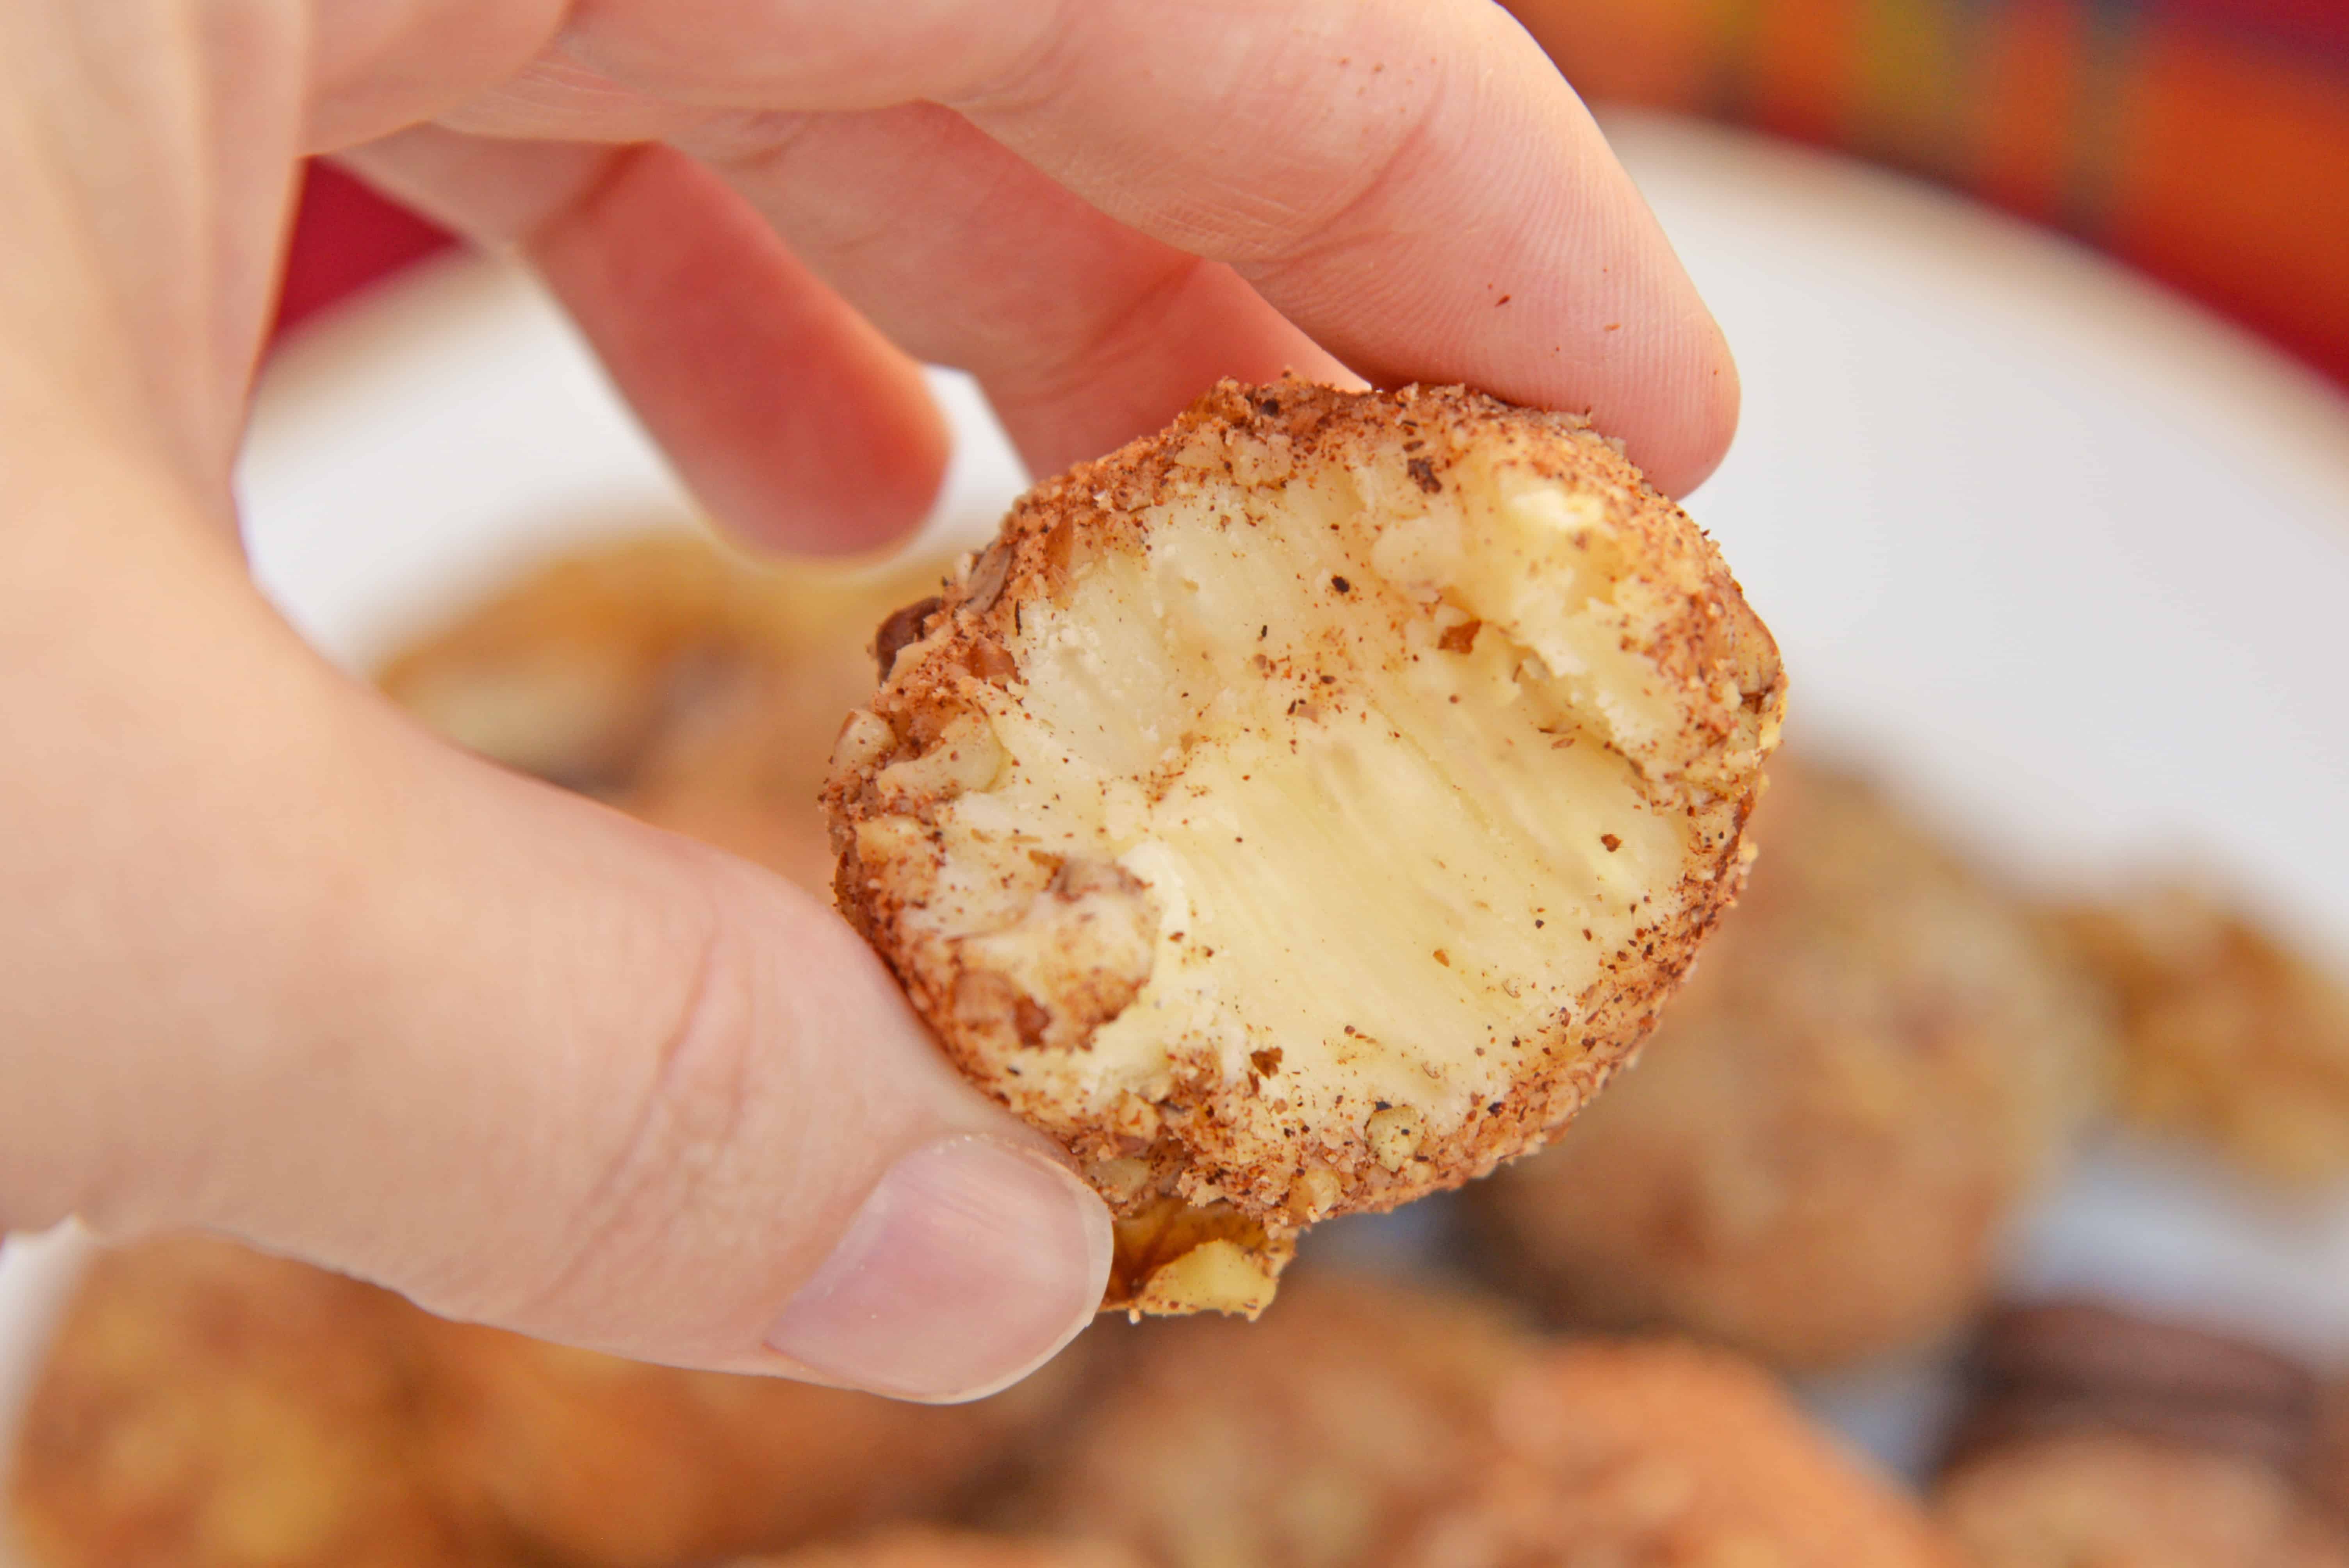 White Chocolate Truffles are an easy truffle recipe made with just a handful of ingredients. Creamy white chocolate rolled in toasted pecans, cinnamon and nutmeg. #whitechocolatetruffles #easytrufflerecipe www.savoryexperiments.com 